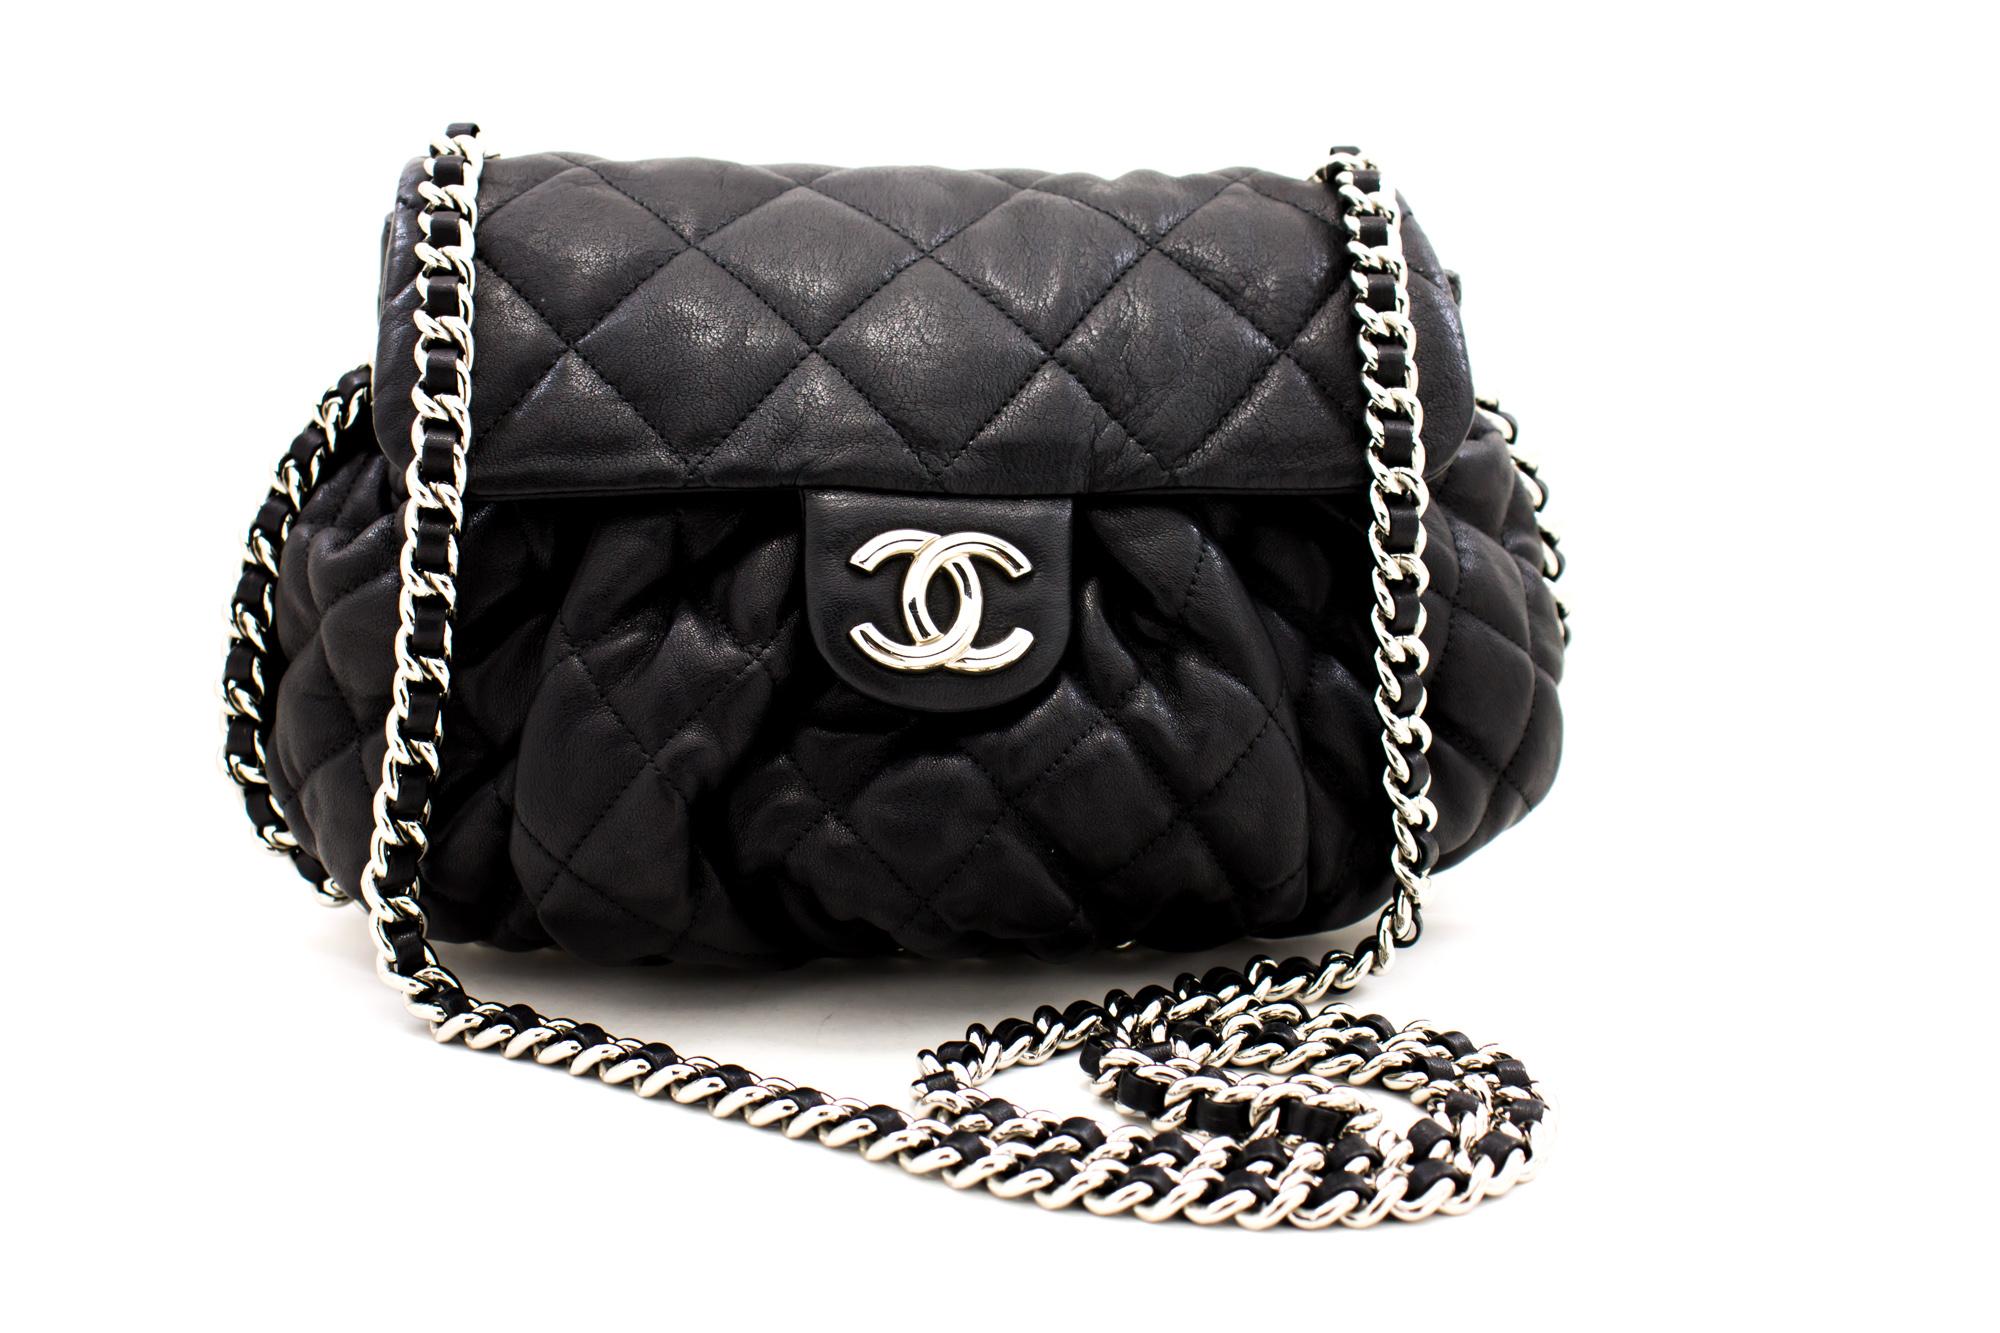 An authentic CHANEL Chain Around Shoulder Bag Crossbody Black Calfskin Leather. The color is Black. The outside material is Leather. The pattern is Solid. This item is Contemporary. The year of manufacture would be 2012.
Conditions & Ratings
Outside